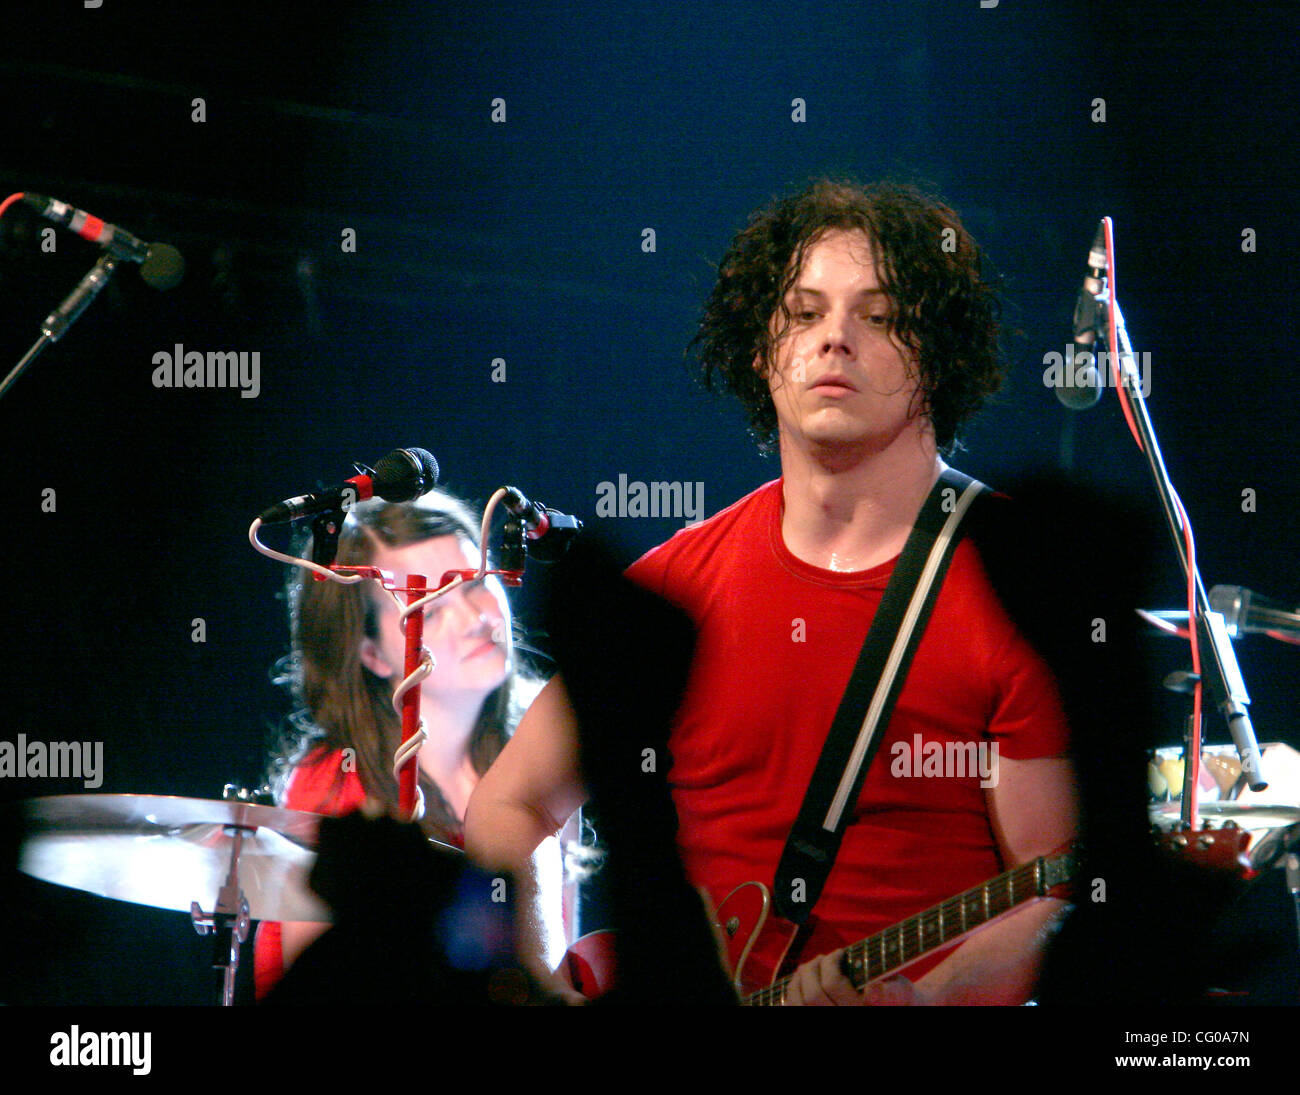 Jack White and Meg White - The White Stripes, performing at The Filmore East at Irving Plaza on June 19, 2007 Stock Photo